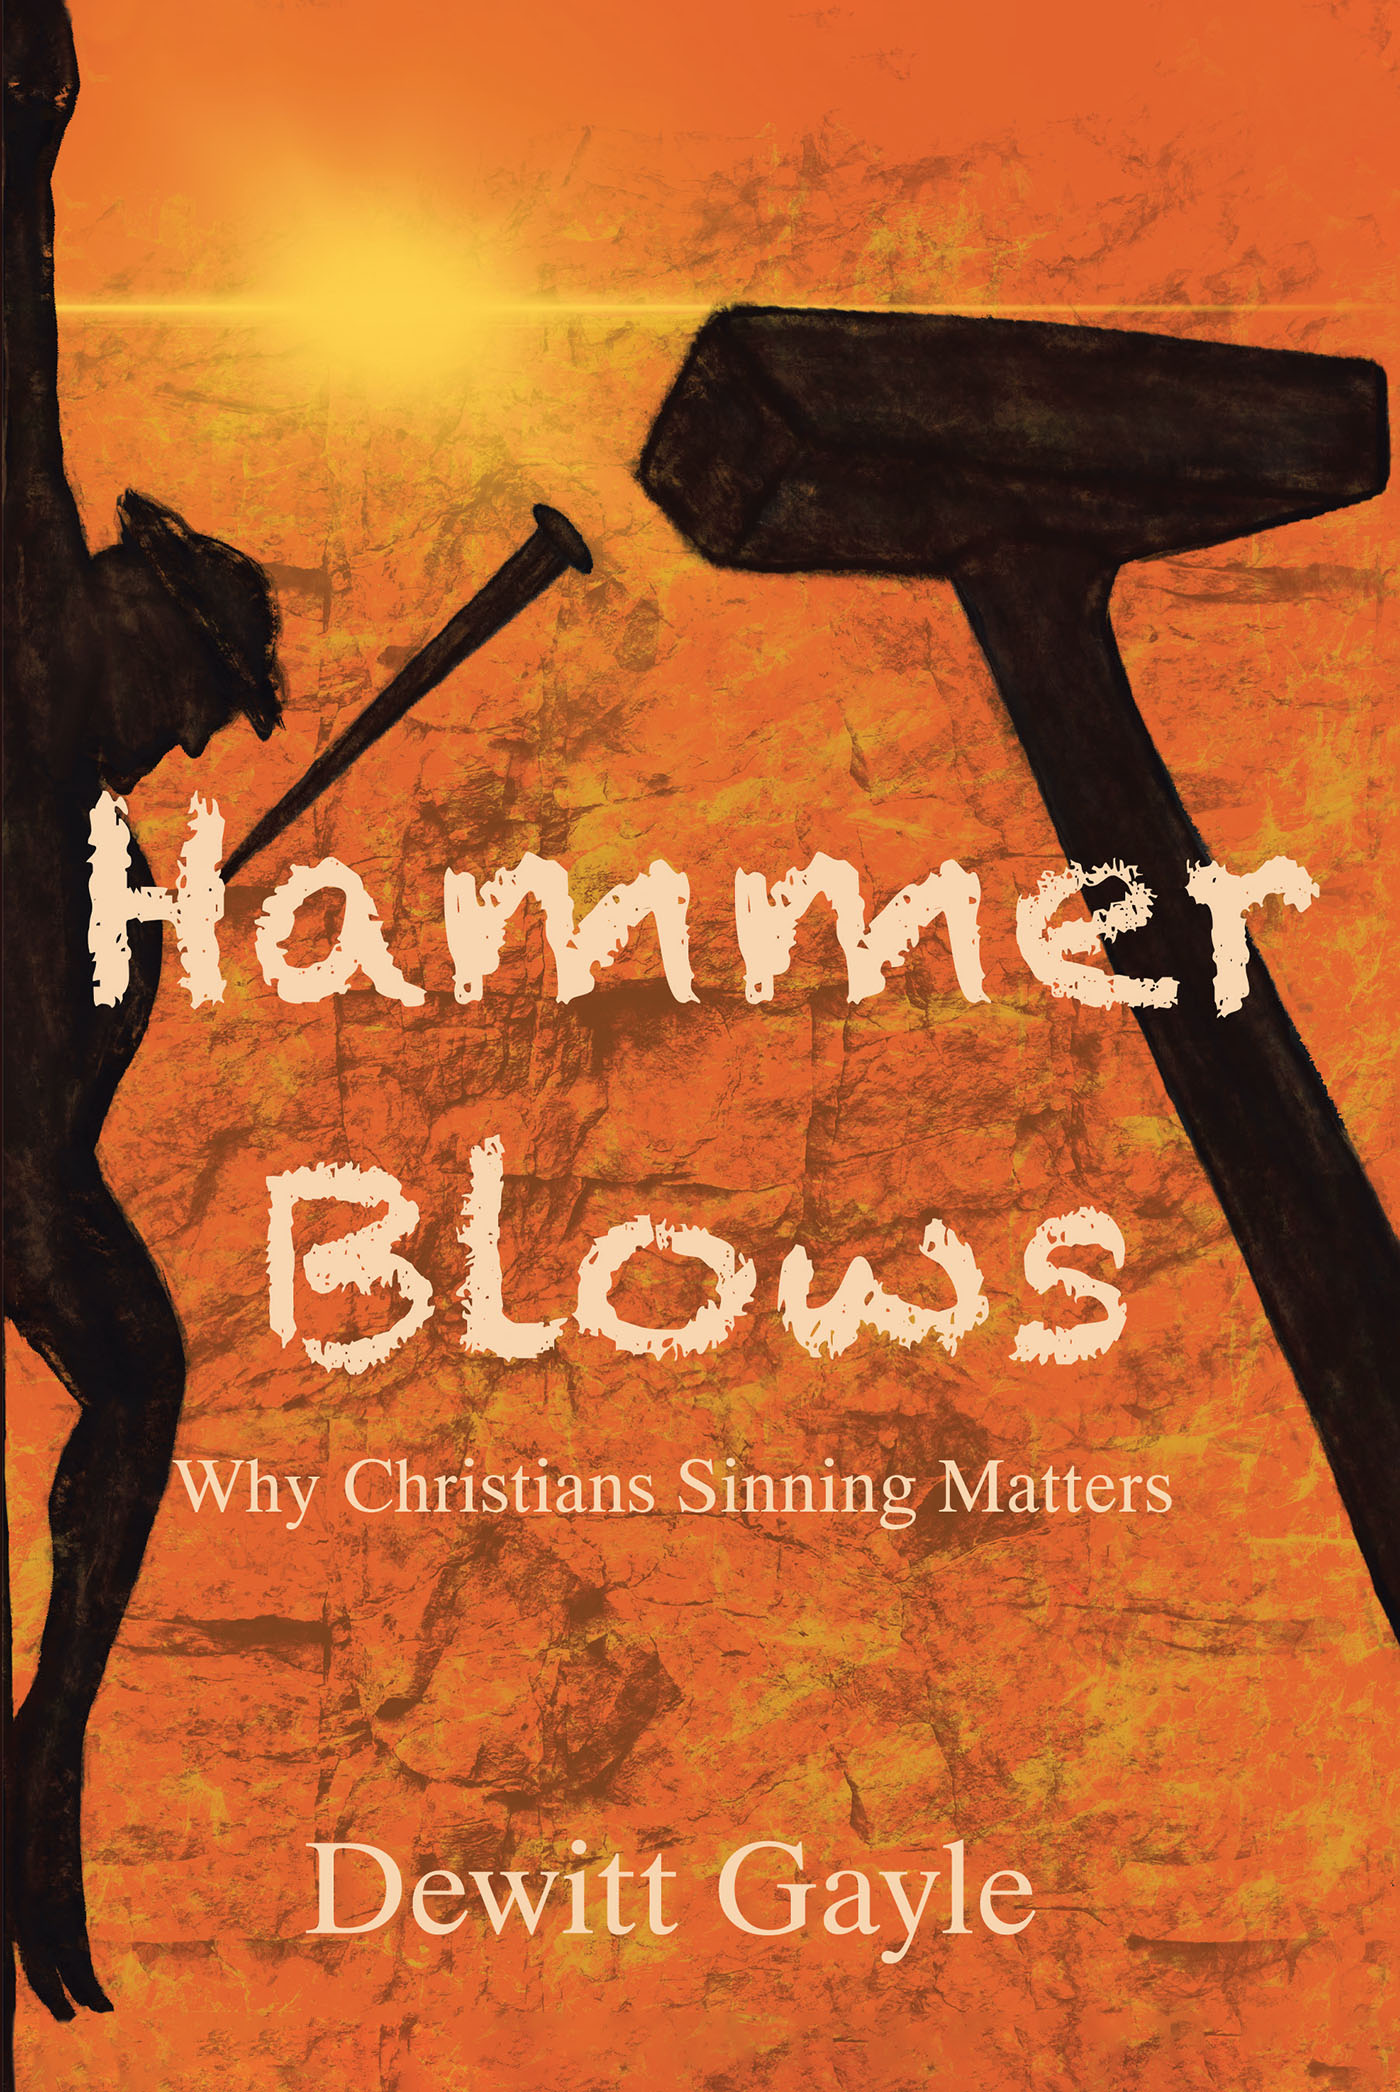 Dewitt Gayle’s Newly Released "Hammer Blows: Why Christians Sinning Matters" is a Passionate Message of the Need to Live a God Led Life